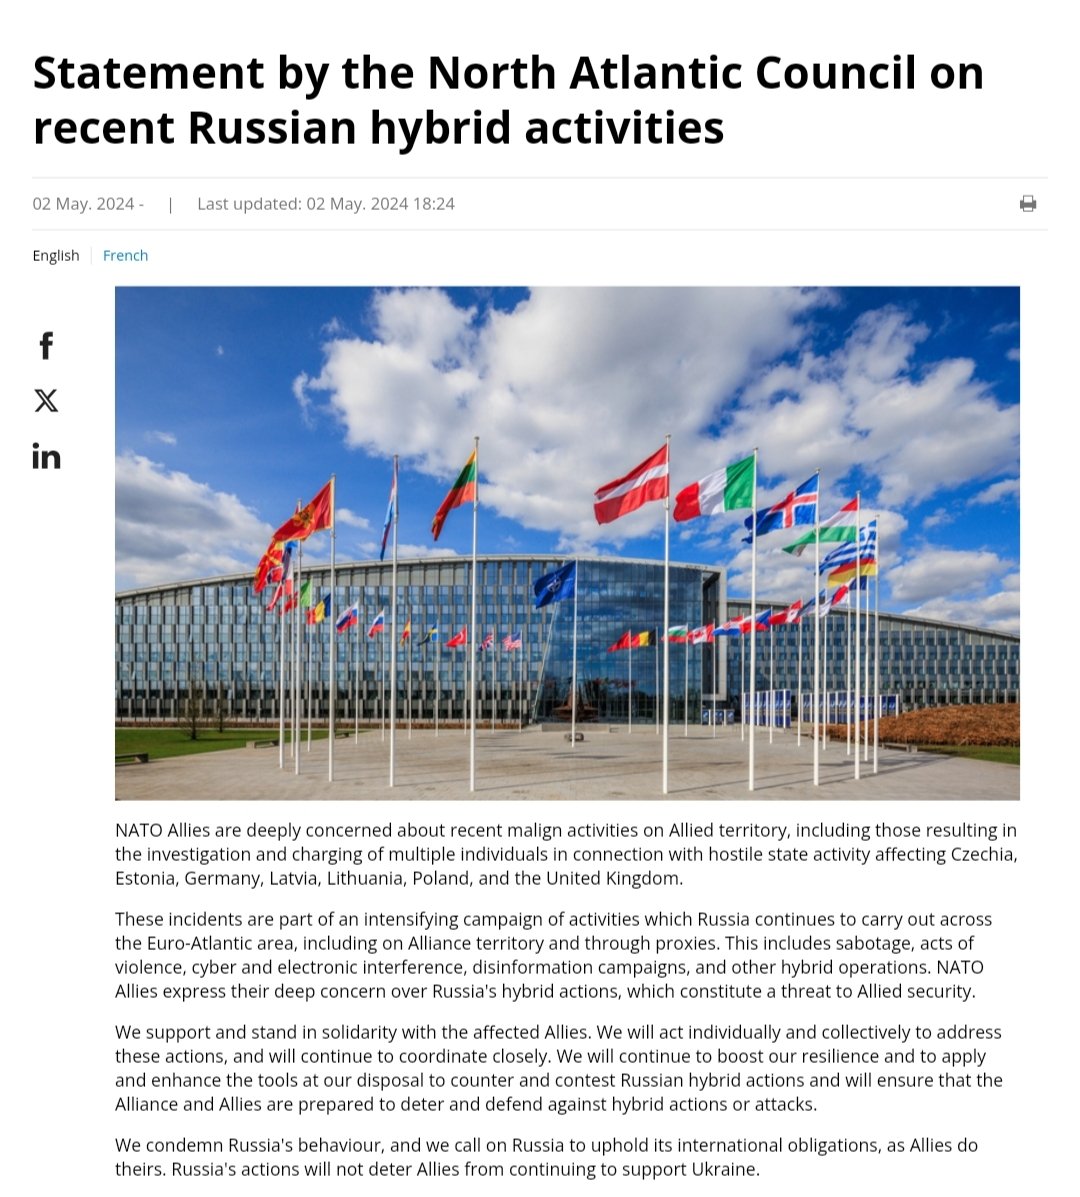 #BREAKING: NATO released an official statement regarding 'recent Russian hybrid activities' on the territory of the Alliance. NATO blames Russia for conducting acts of sabotage, acts of violence, cyber and electronic interference, as well as disinformation campaigns, which…